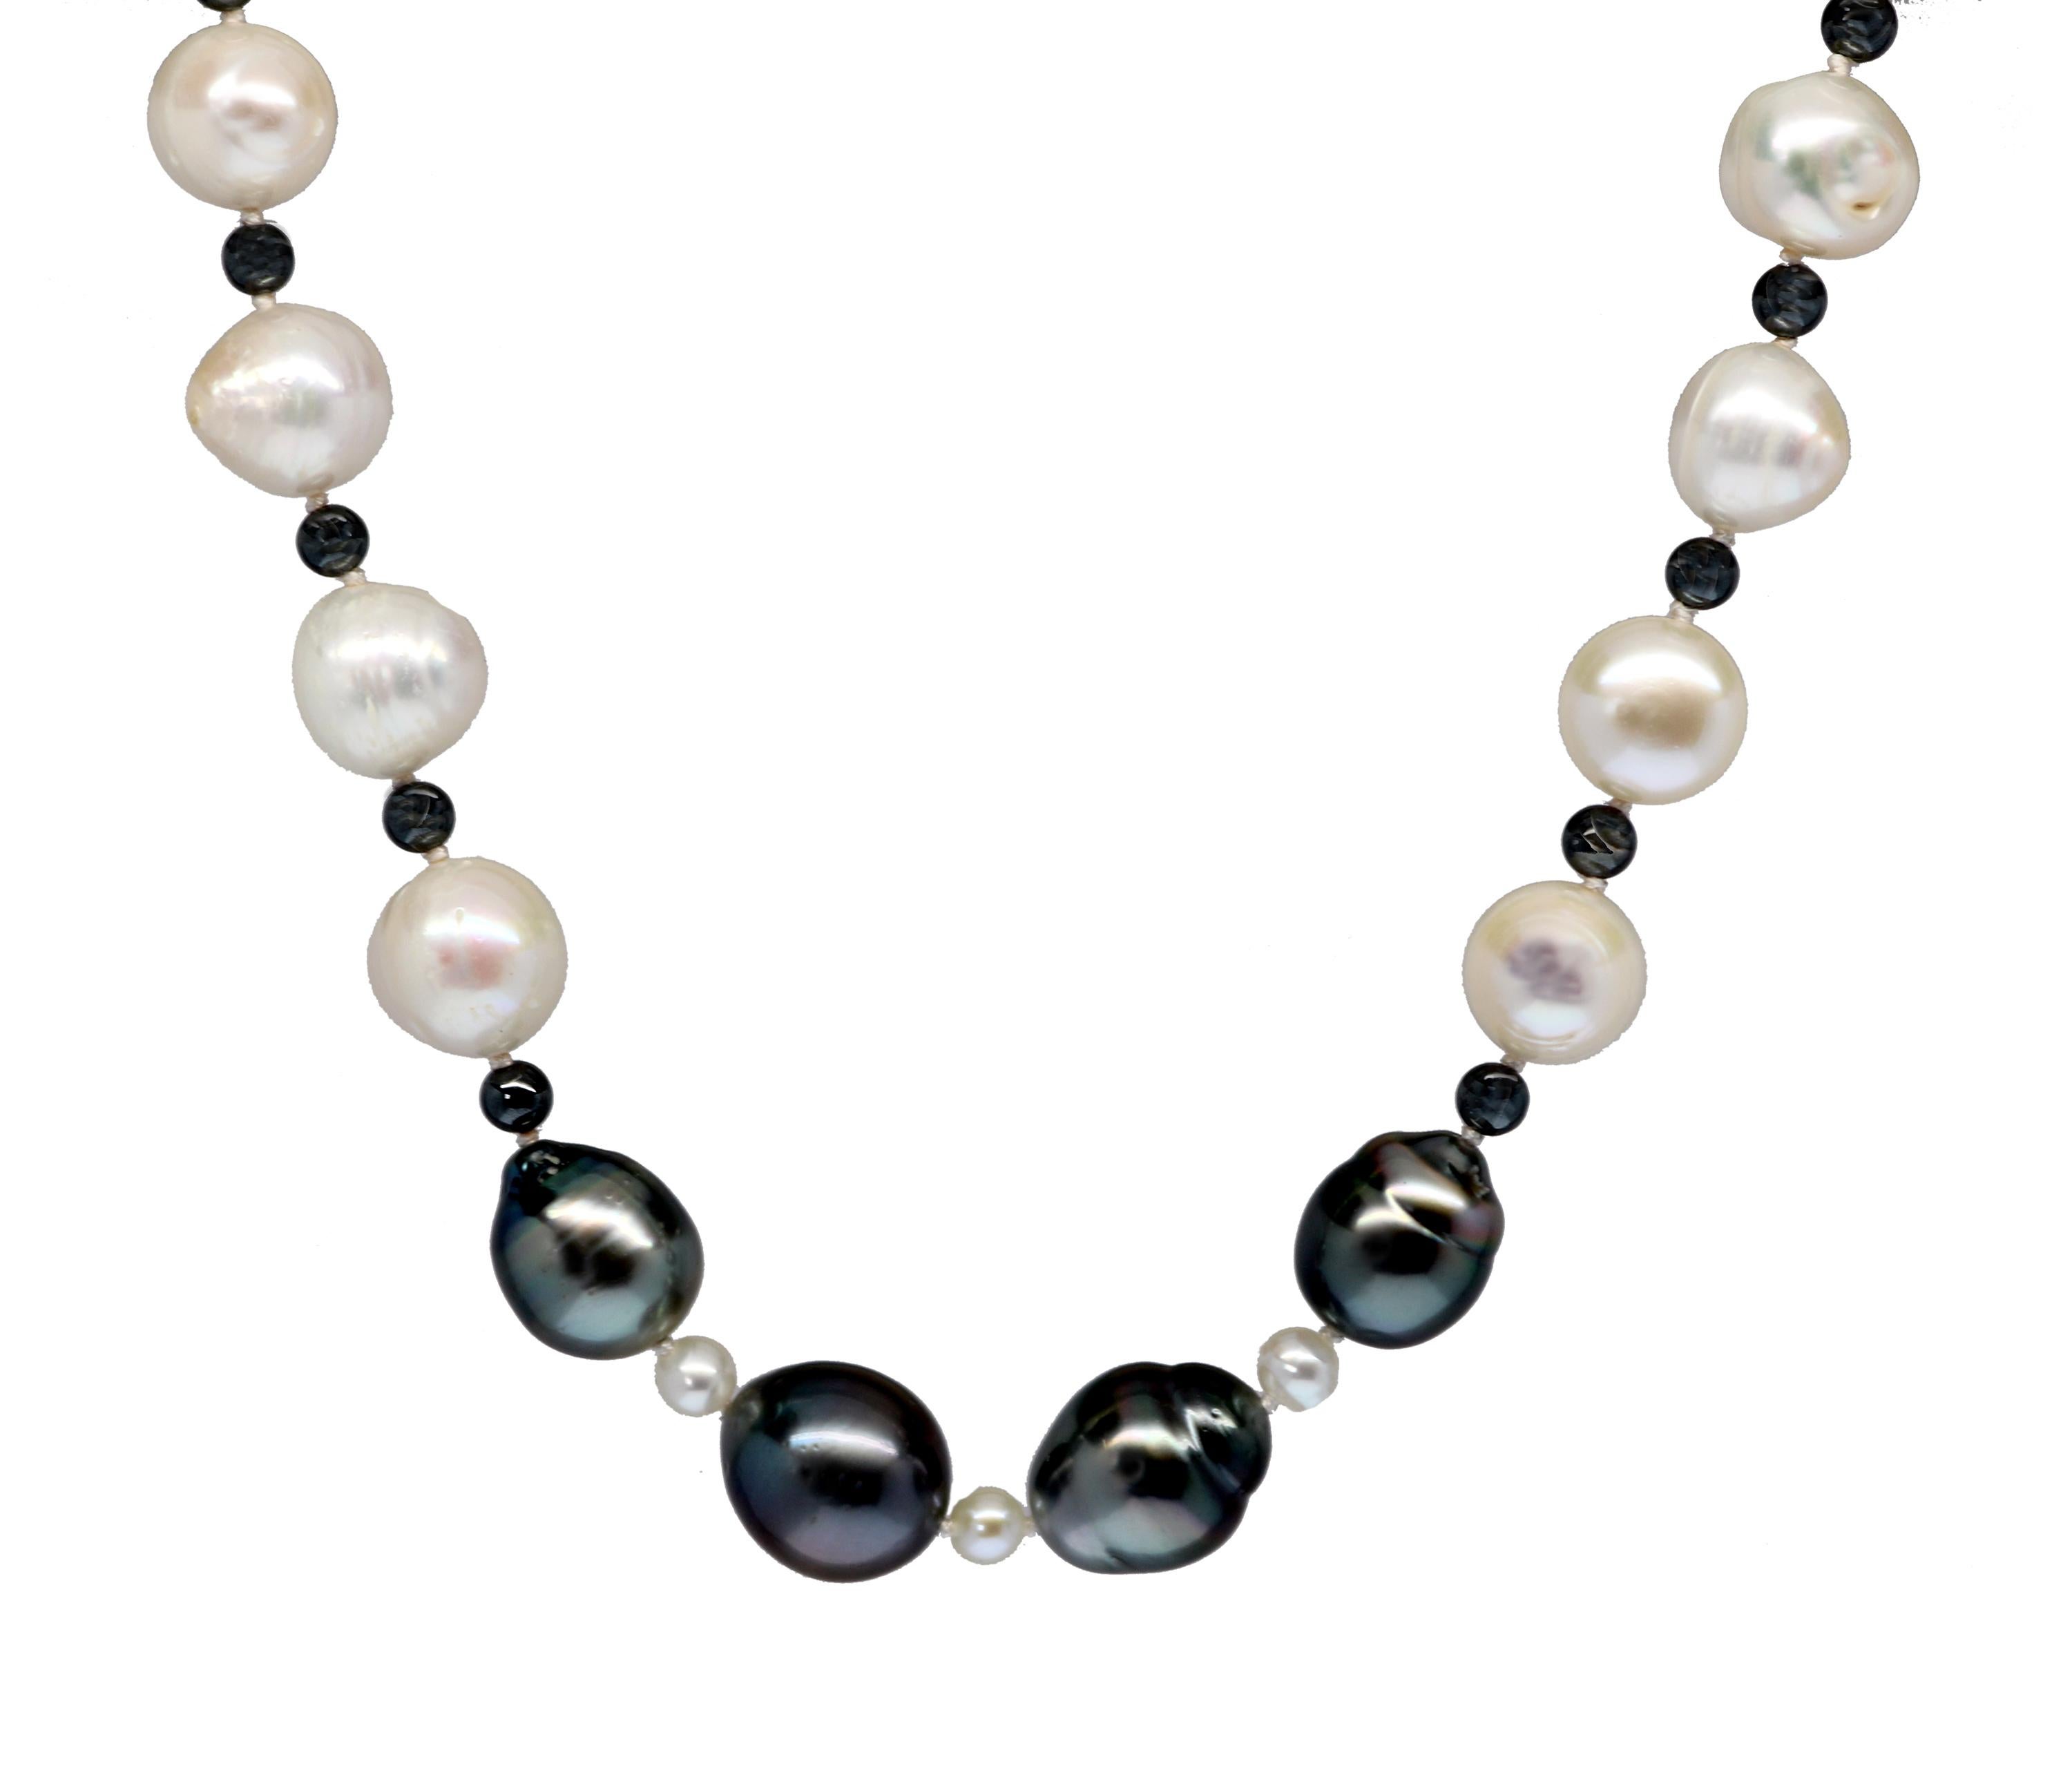 Classic with a modern twist, this newly designed piece features four beautifully natural soft gray baroque pearls and twenty four  10-1/4 mm white baroque ringed Akoya pearls all hand strung and accented with 4 mm hematite beads. The pearls selected